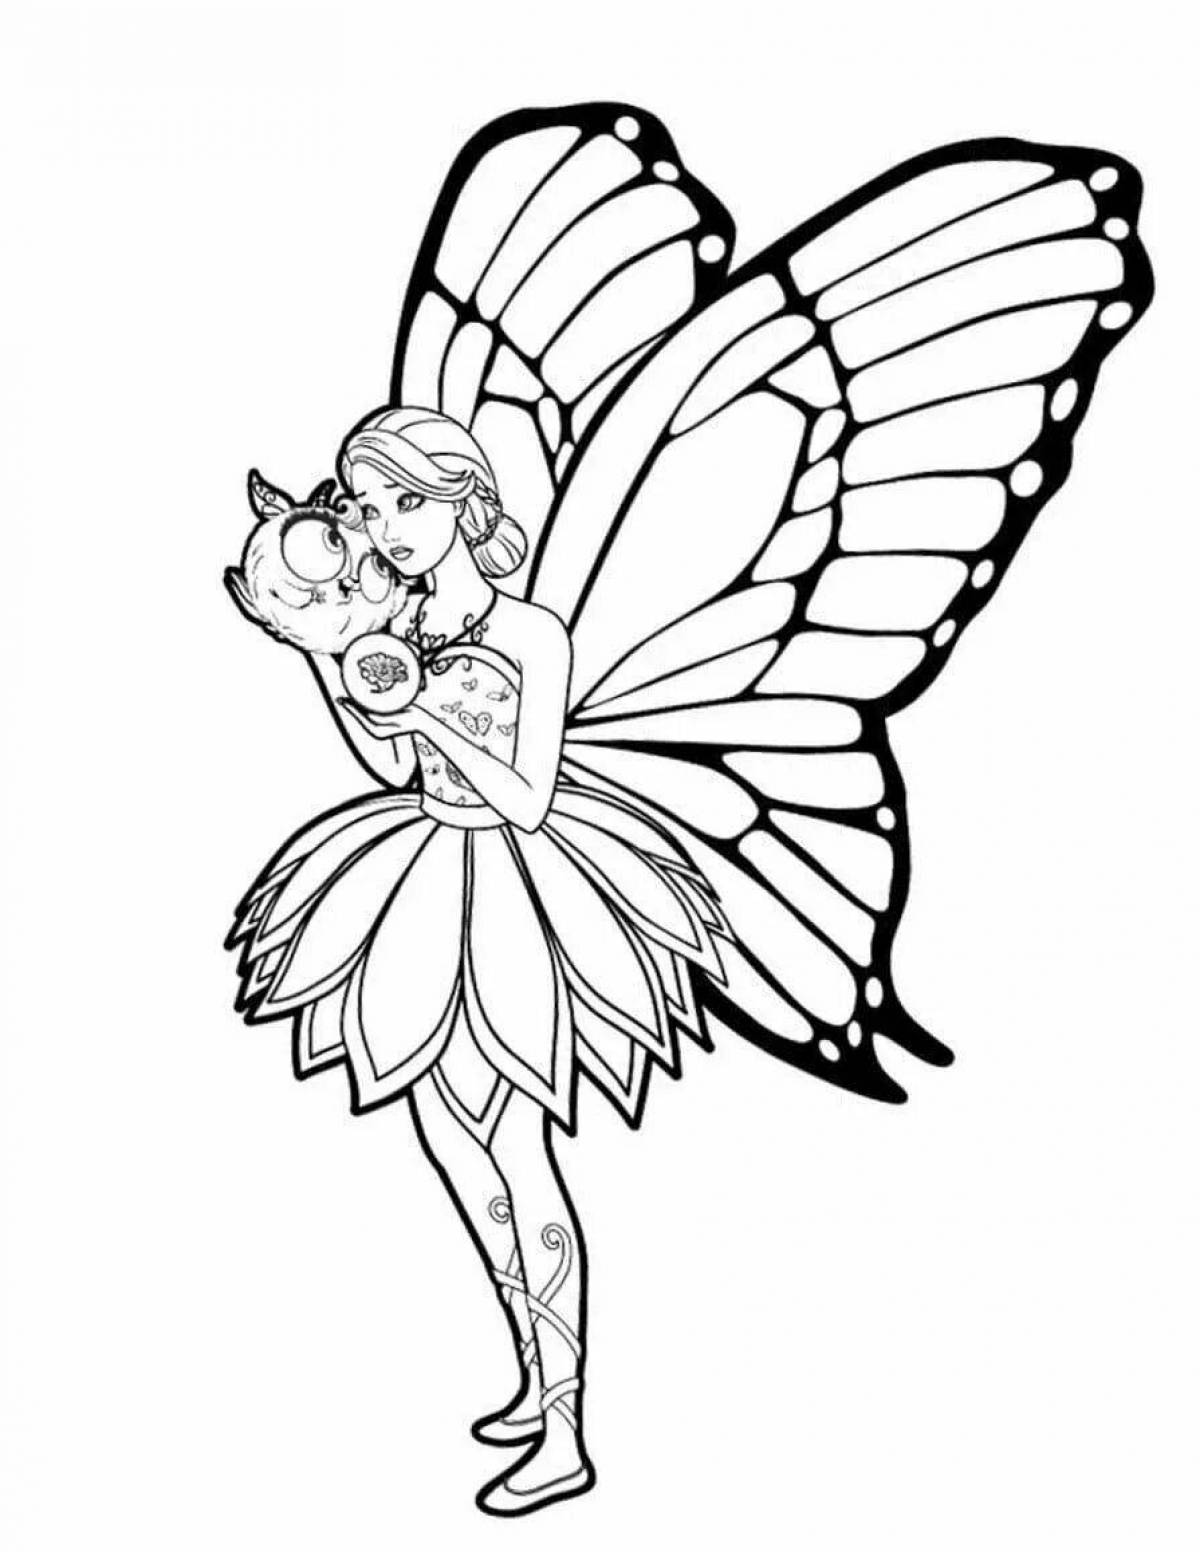 Dazzling fairy princess coloring pages